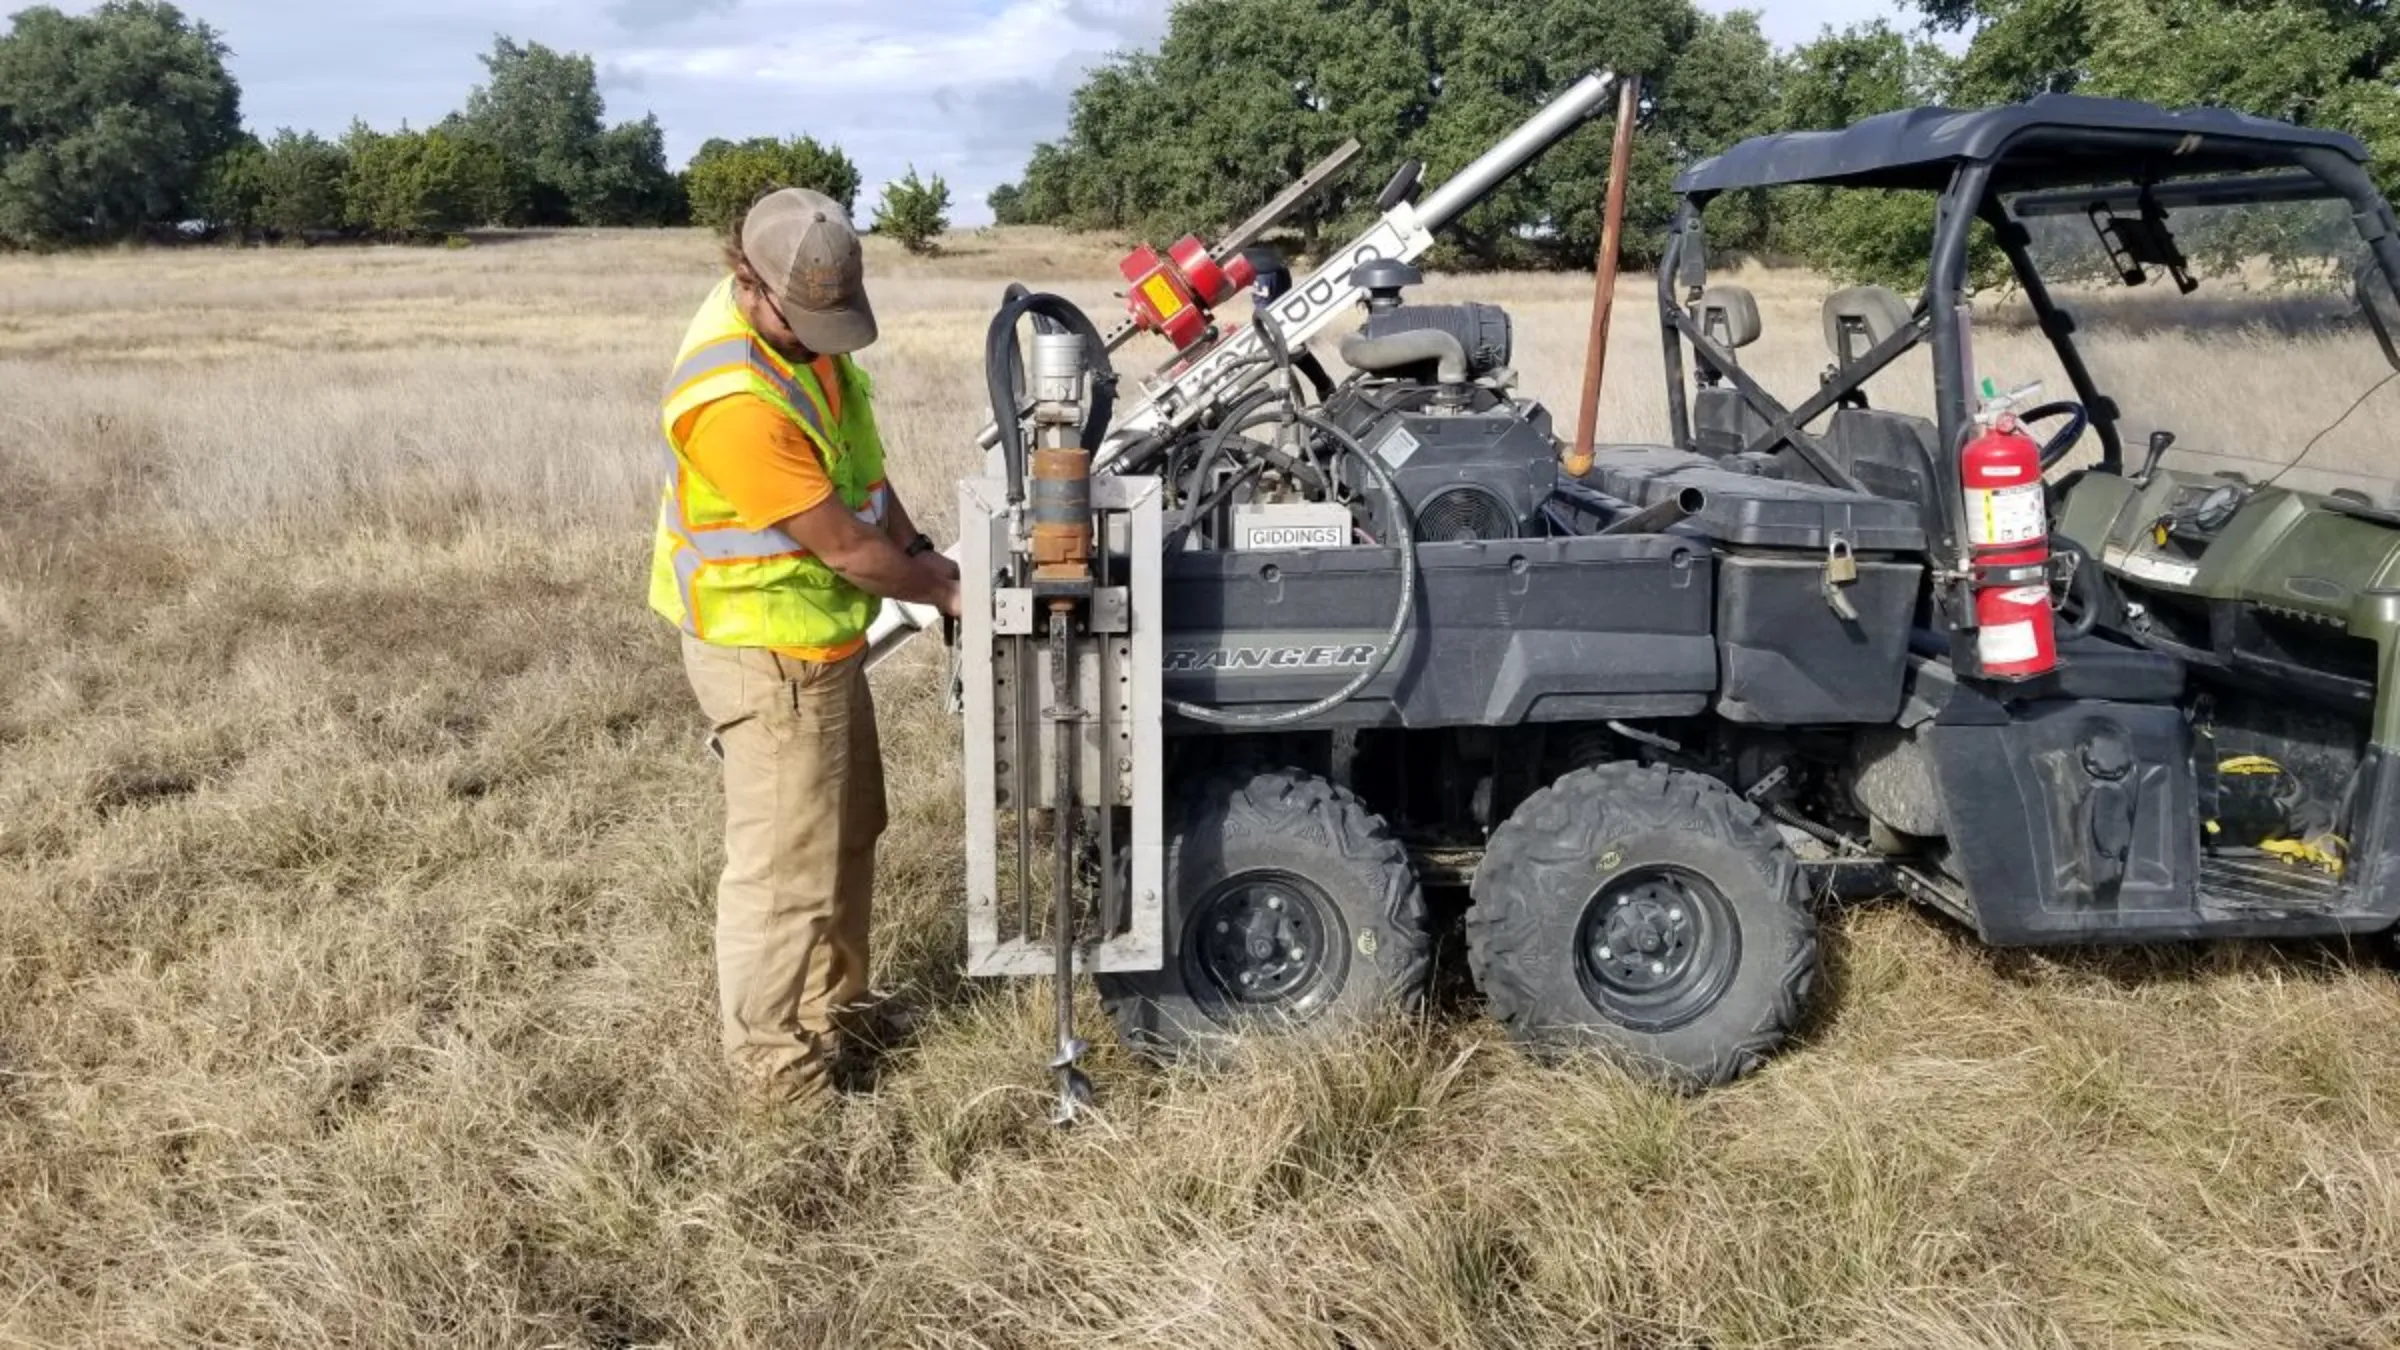 A worker does soil sampling to test for carbon at the Diamond K Ranch in Texas. November 20, 2019